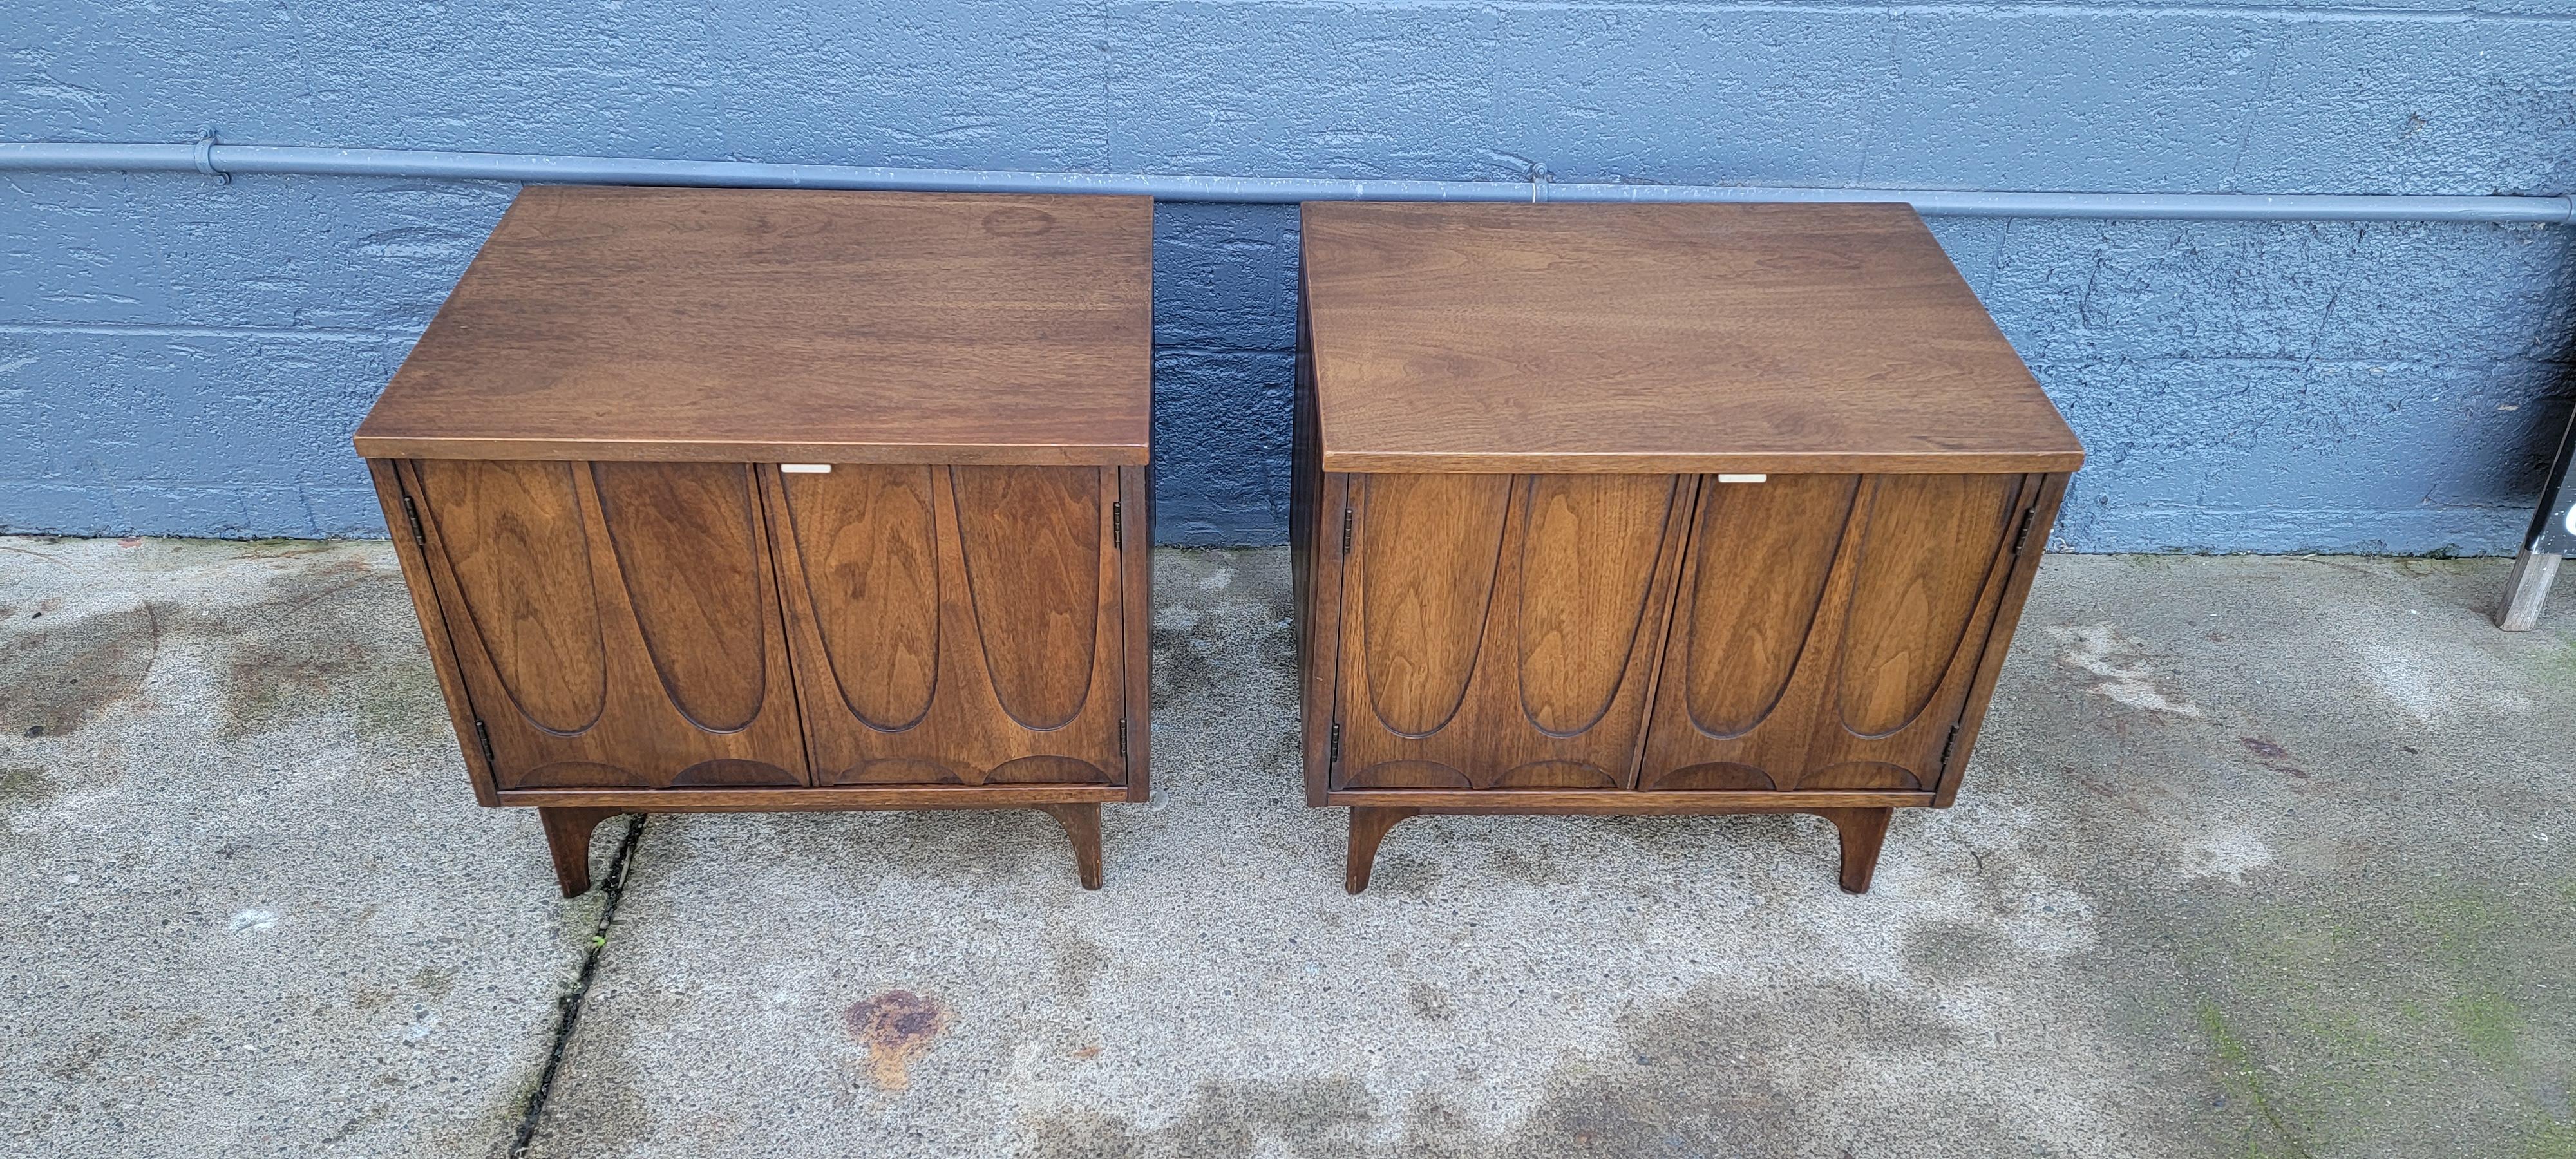 A pair of Mid-Century Modern Broyhill Brasilia nightstands / end tables. Introduced at the 1962 Seattle World’s Fair. Inspired by the newly created capital of Brazil designed by Oscar Niemeyer between 1956 and 1961. Features parabolic shape cabinets